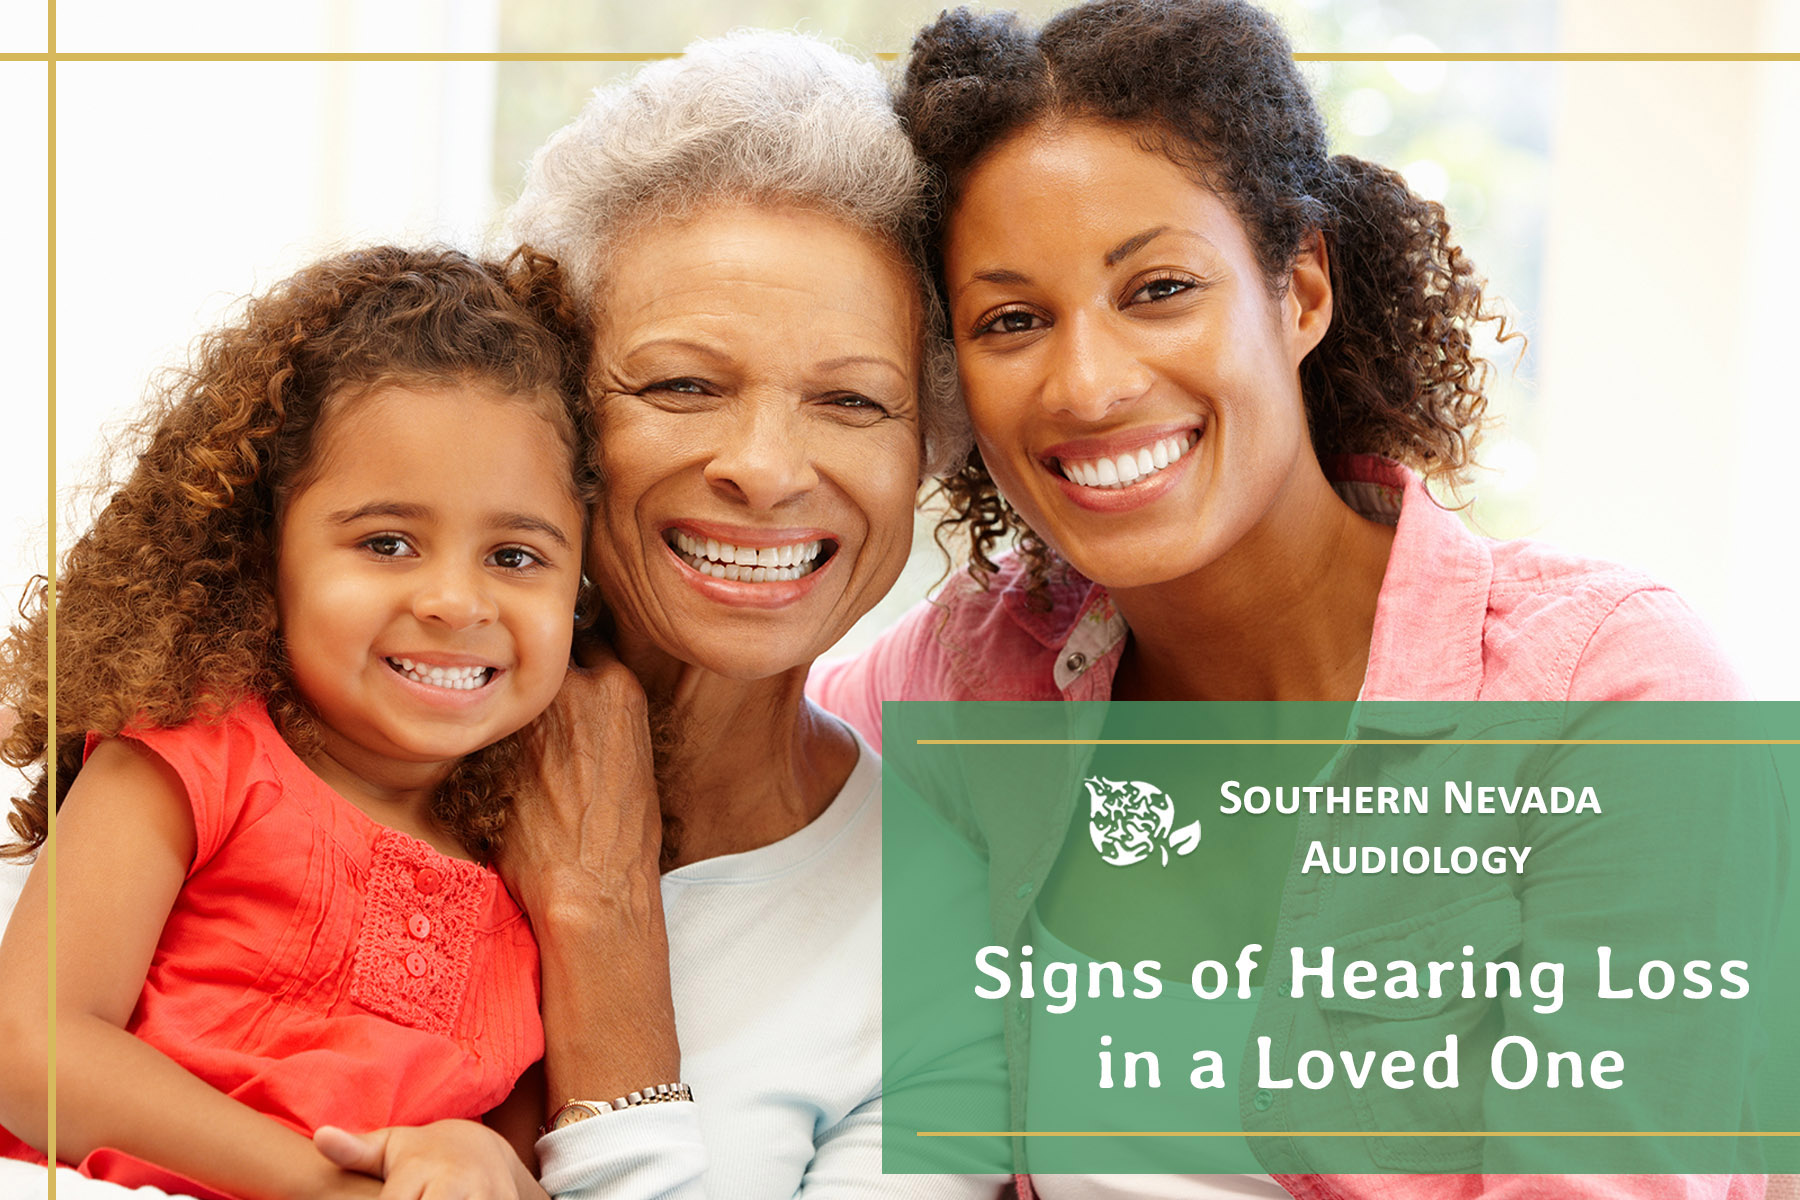 Signs of Hearing Loss in a Loved One